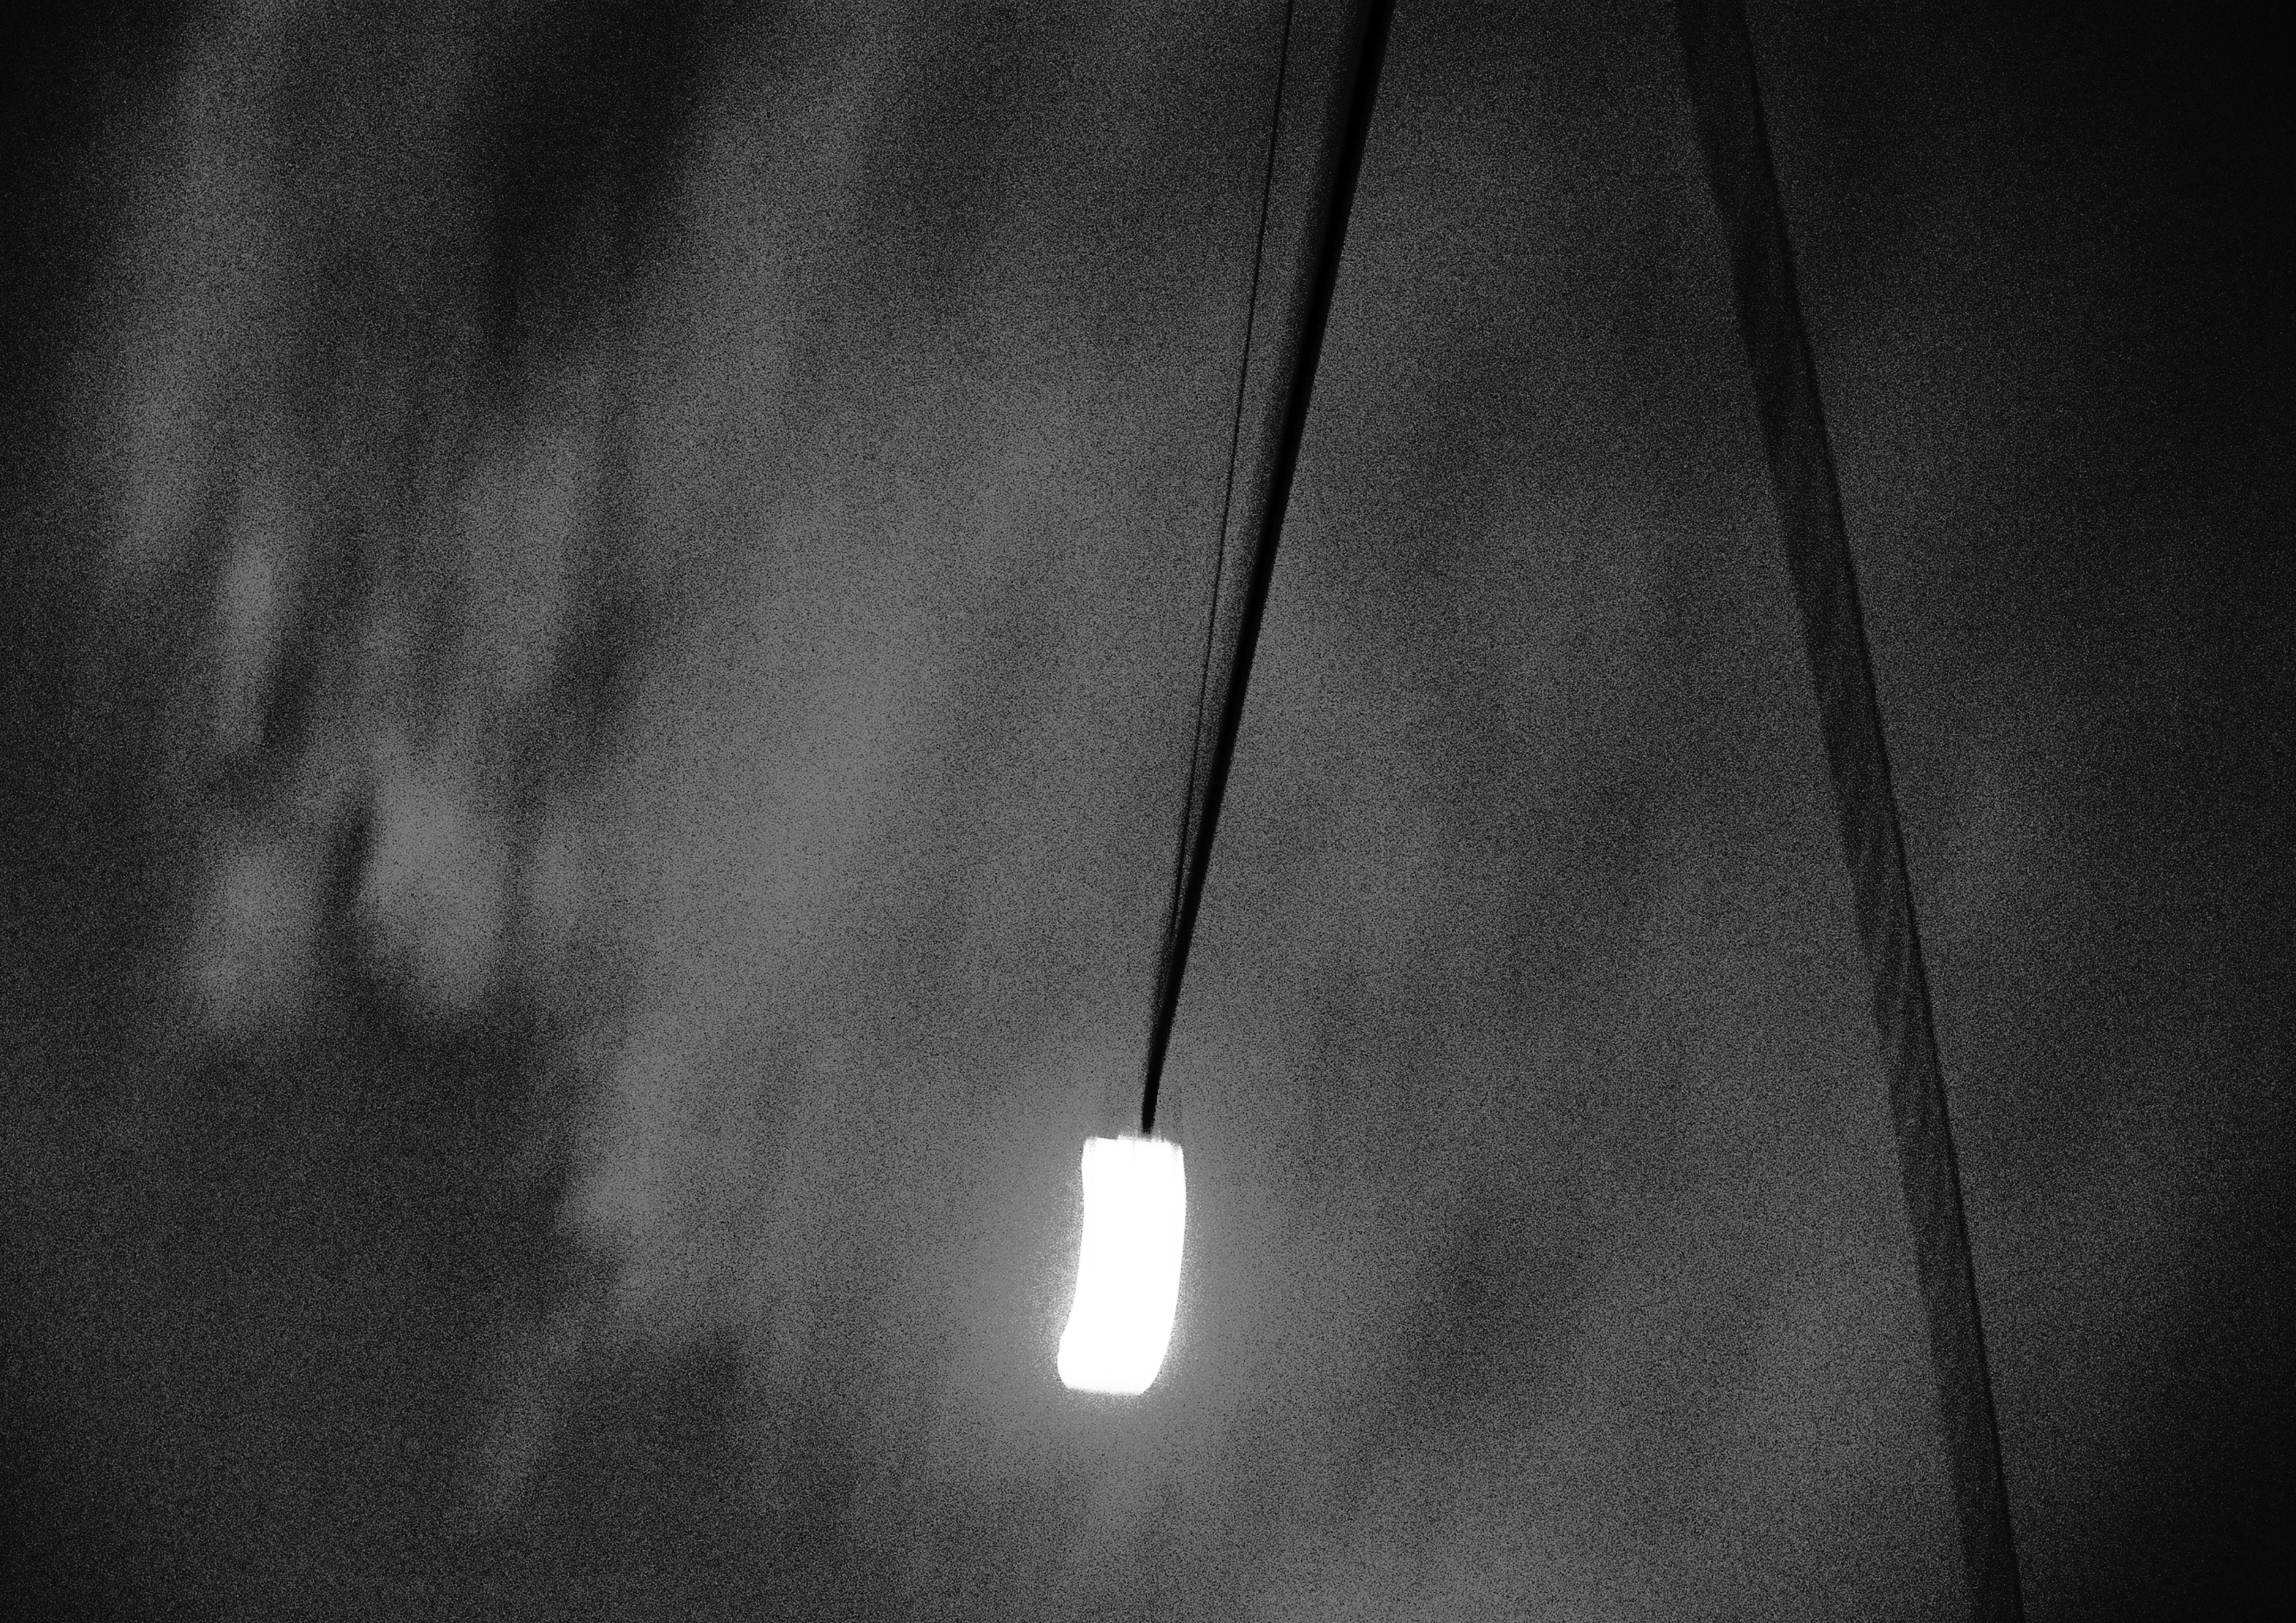 A blurry image of a street light. the image is black and white. The white of the light is blown out, no detail. dark skies and clouds in the background.